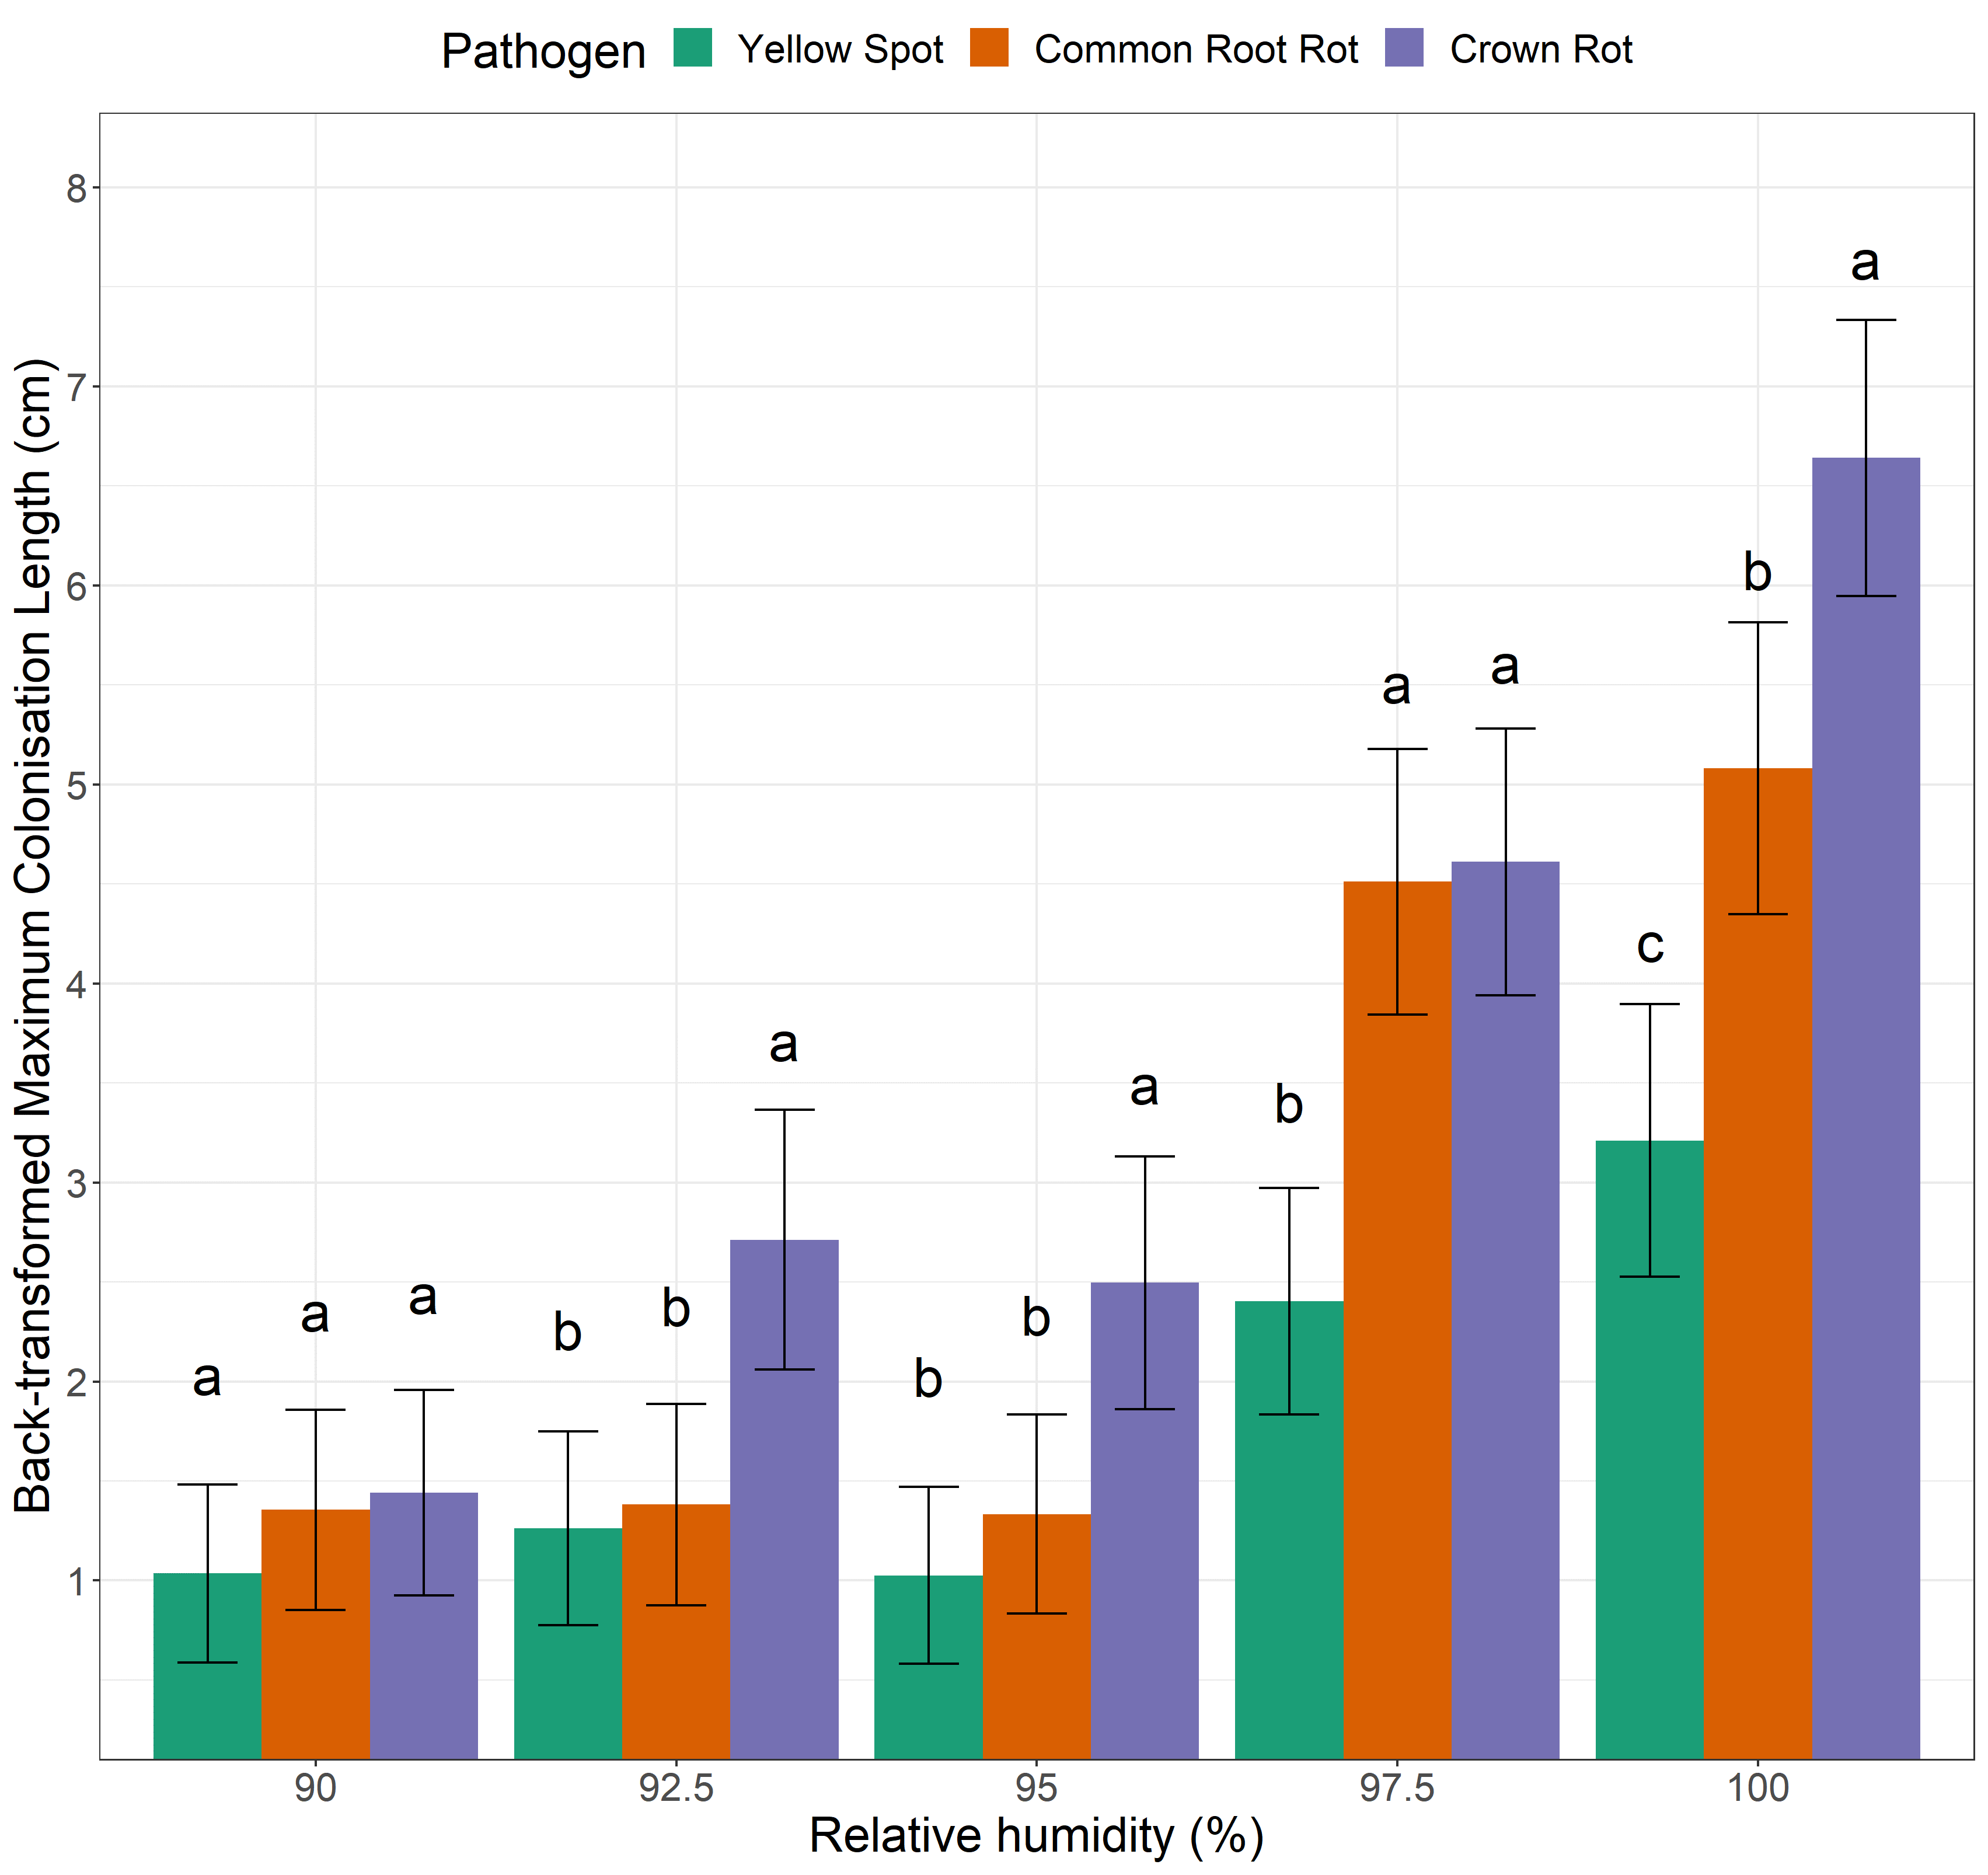 This column graph with error bars shows the maximum colonisation (cm) of cereal stubble by three cereal pathogens subject to moisture conditions of 90% RH, 92.5% RH, 95% RH, 97.5% RH or 100% RH for seven days. Note LSD letters only enable comparisons between pathogens within a humidity treatment (not between humidity treatments). Values with the same letter are not significantly different (P=0.05). Error bars represent approximate standard error of the mean.